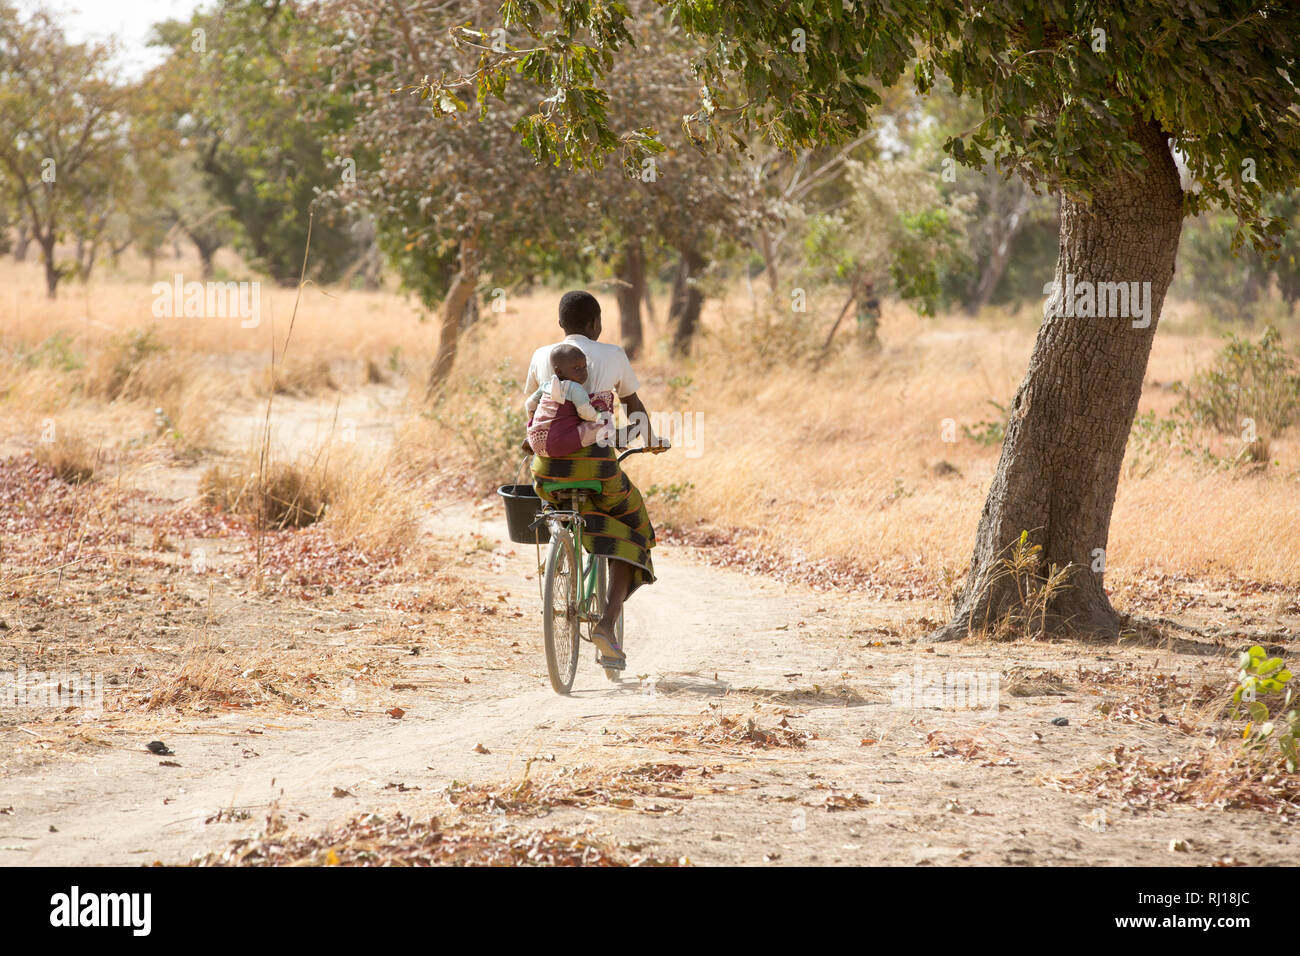 Samba village, Yako Province, Burkina Faso : Collette Guiguemde, 26 with her baby Ornela Divine Zoundi, 18 months, cycles home from her husband's market garden with the ocra she has just harvested. Stock Photo